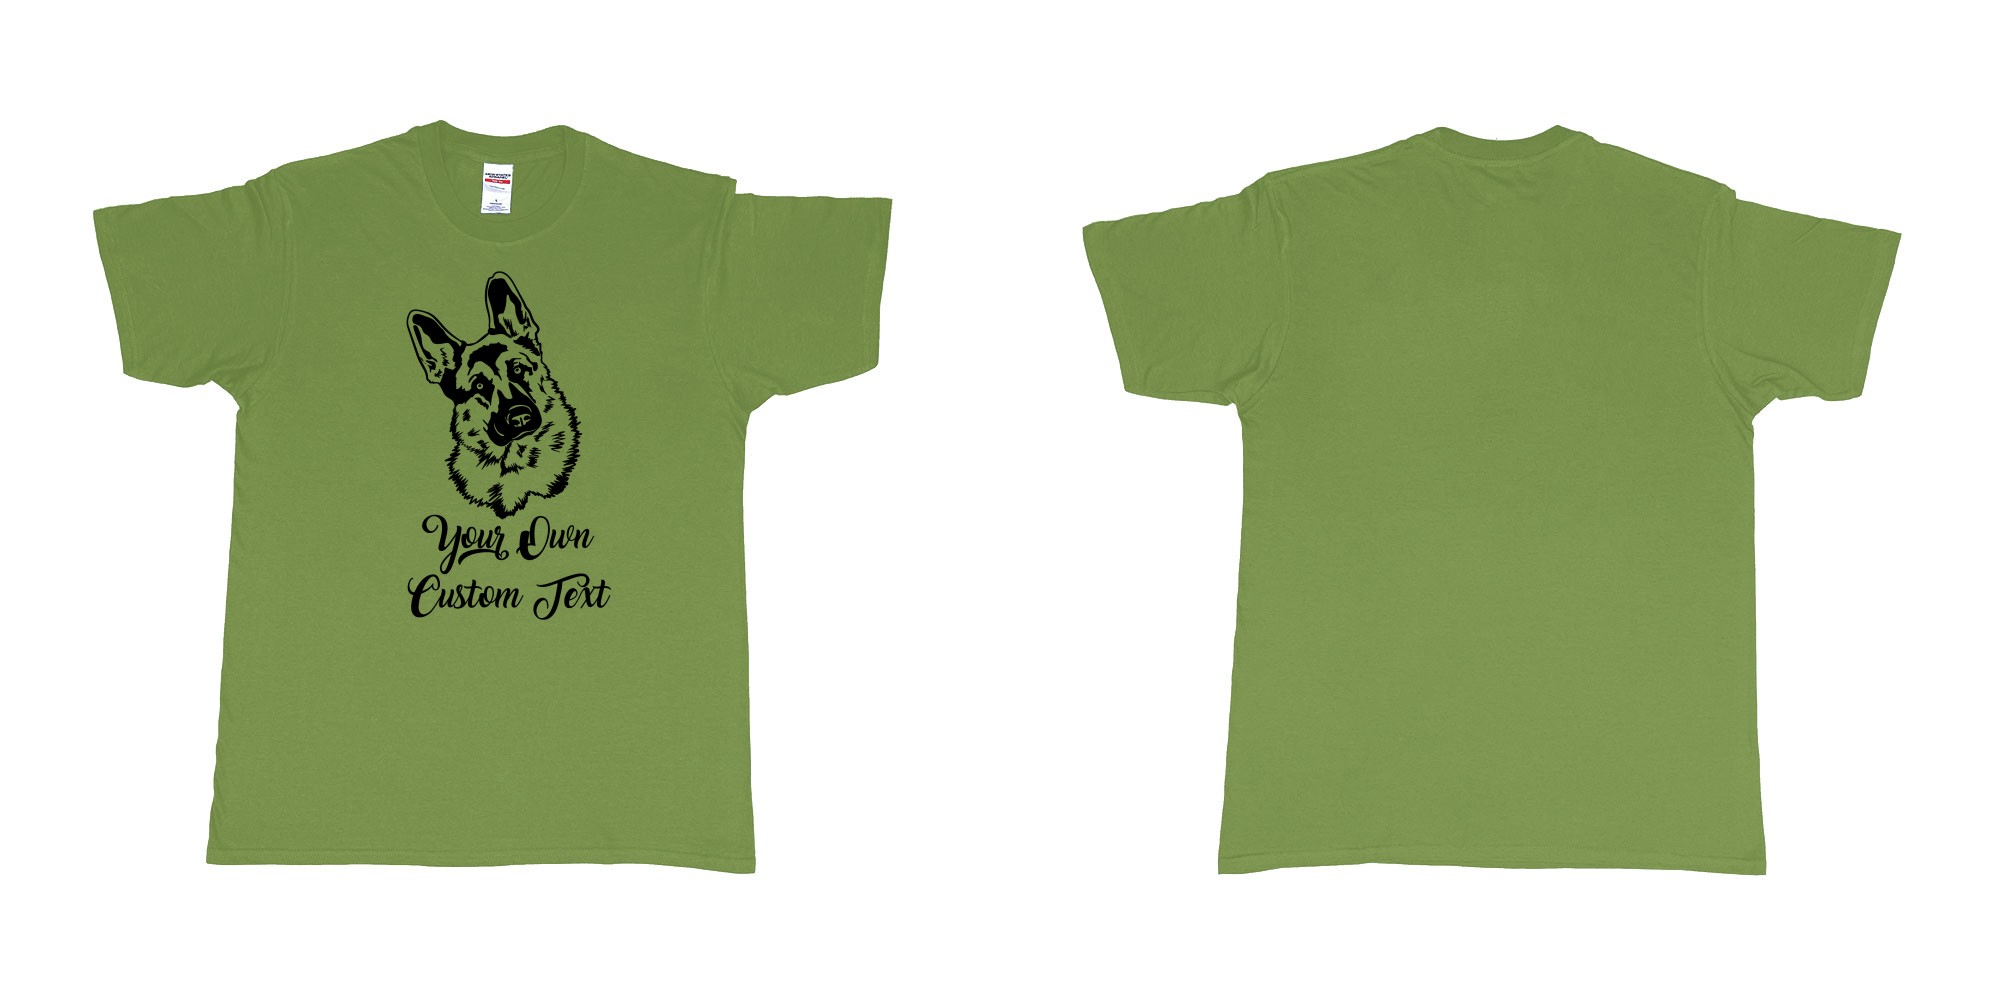 Custom tshirt design zack german shepherd tilts its head your own custom text in fabric color military-green choice your own text made in Bali by The Pirate Way